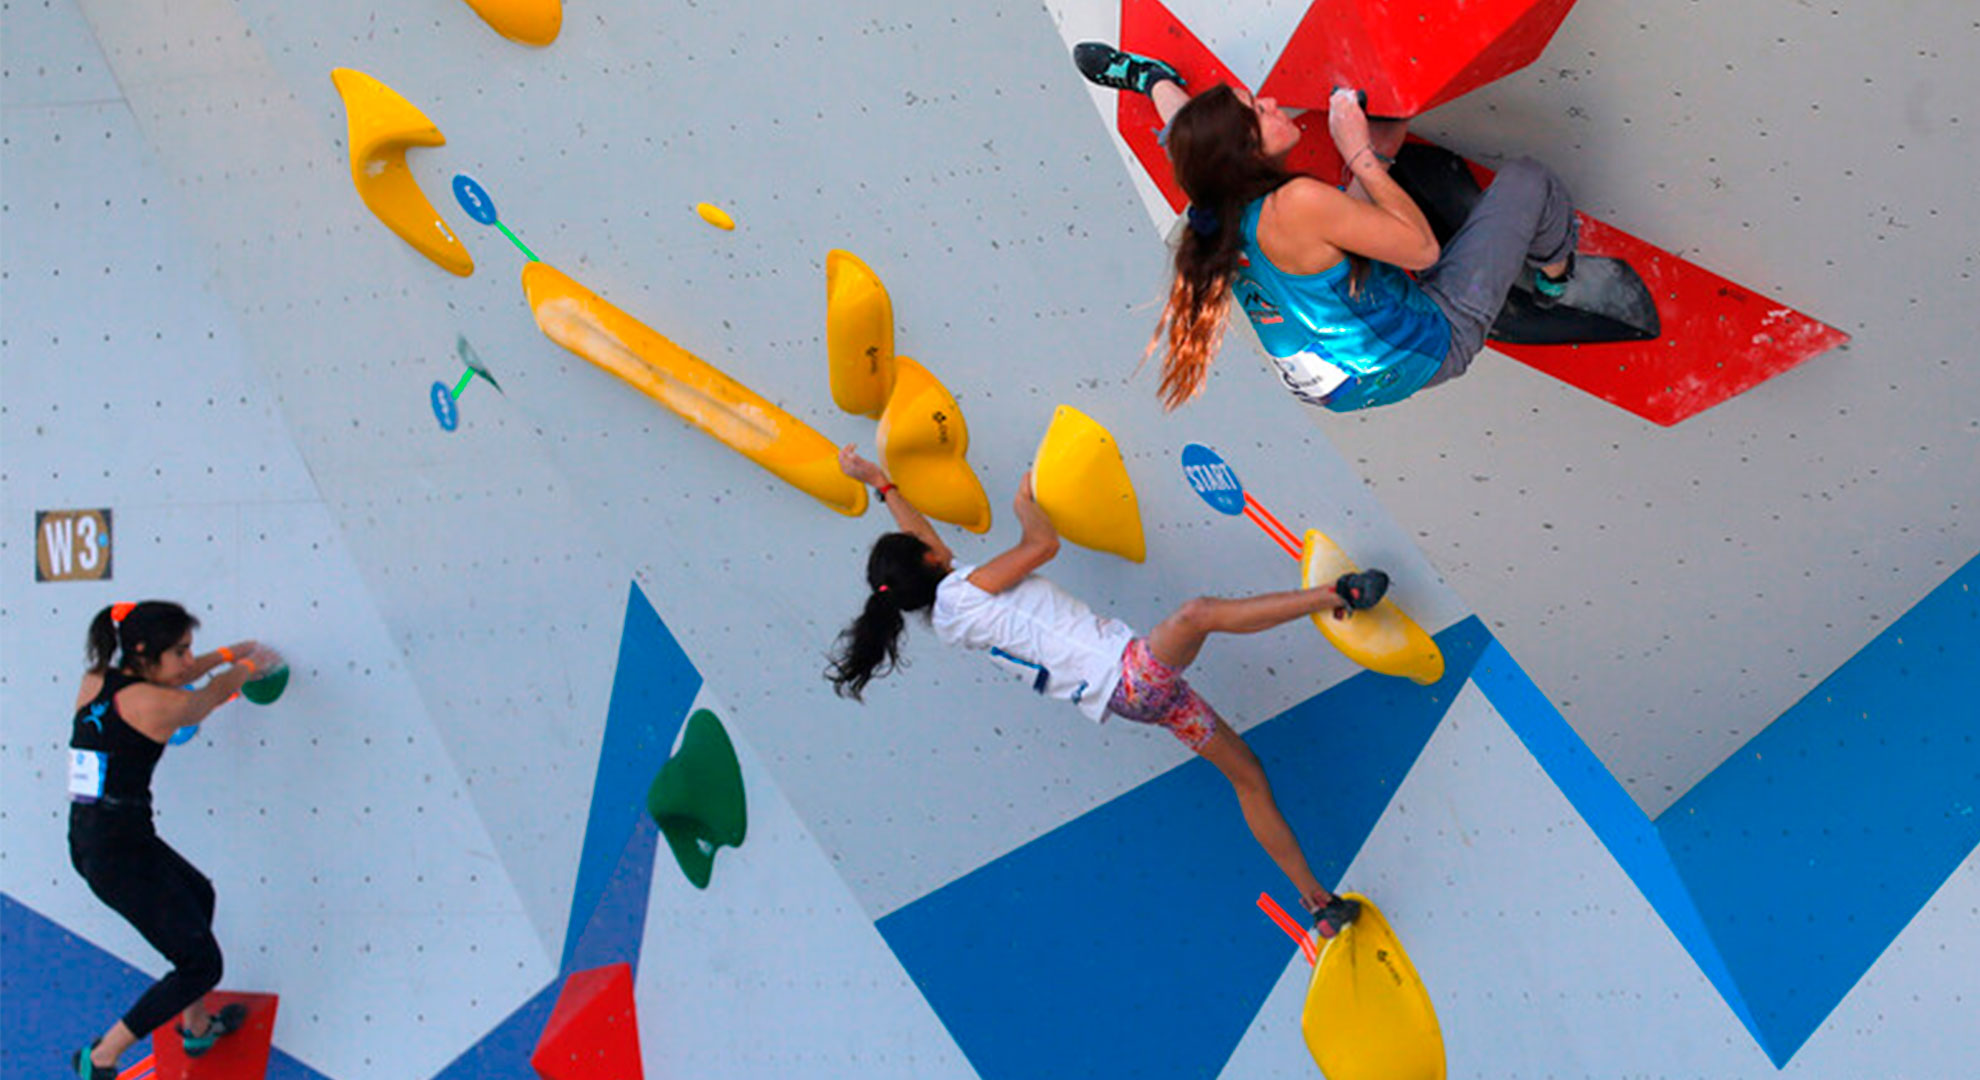 National Climbing Championship: continues this Saturday with bouldering and lead